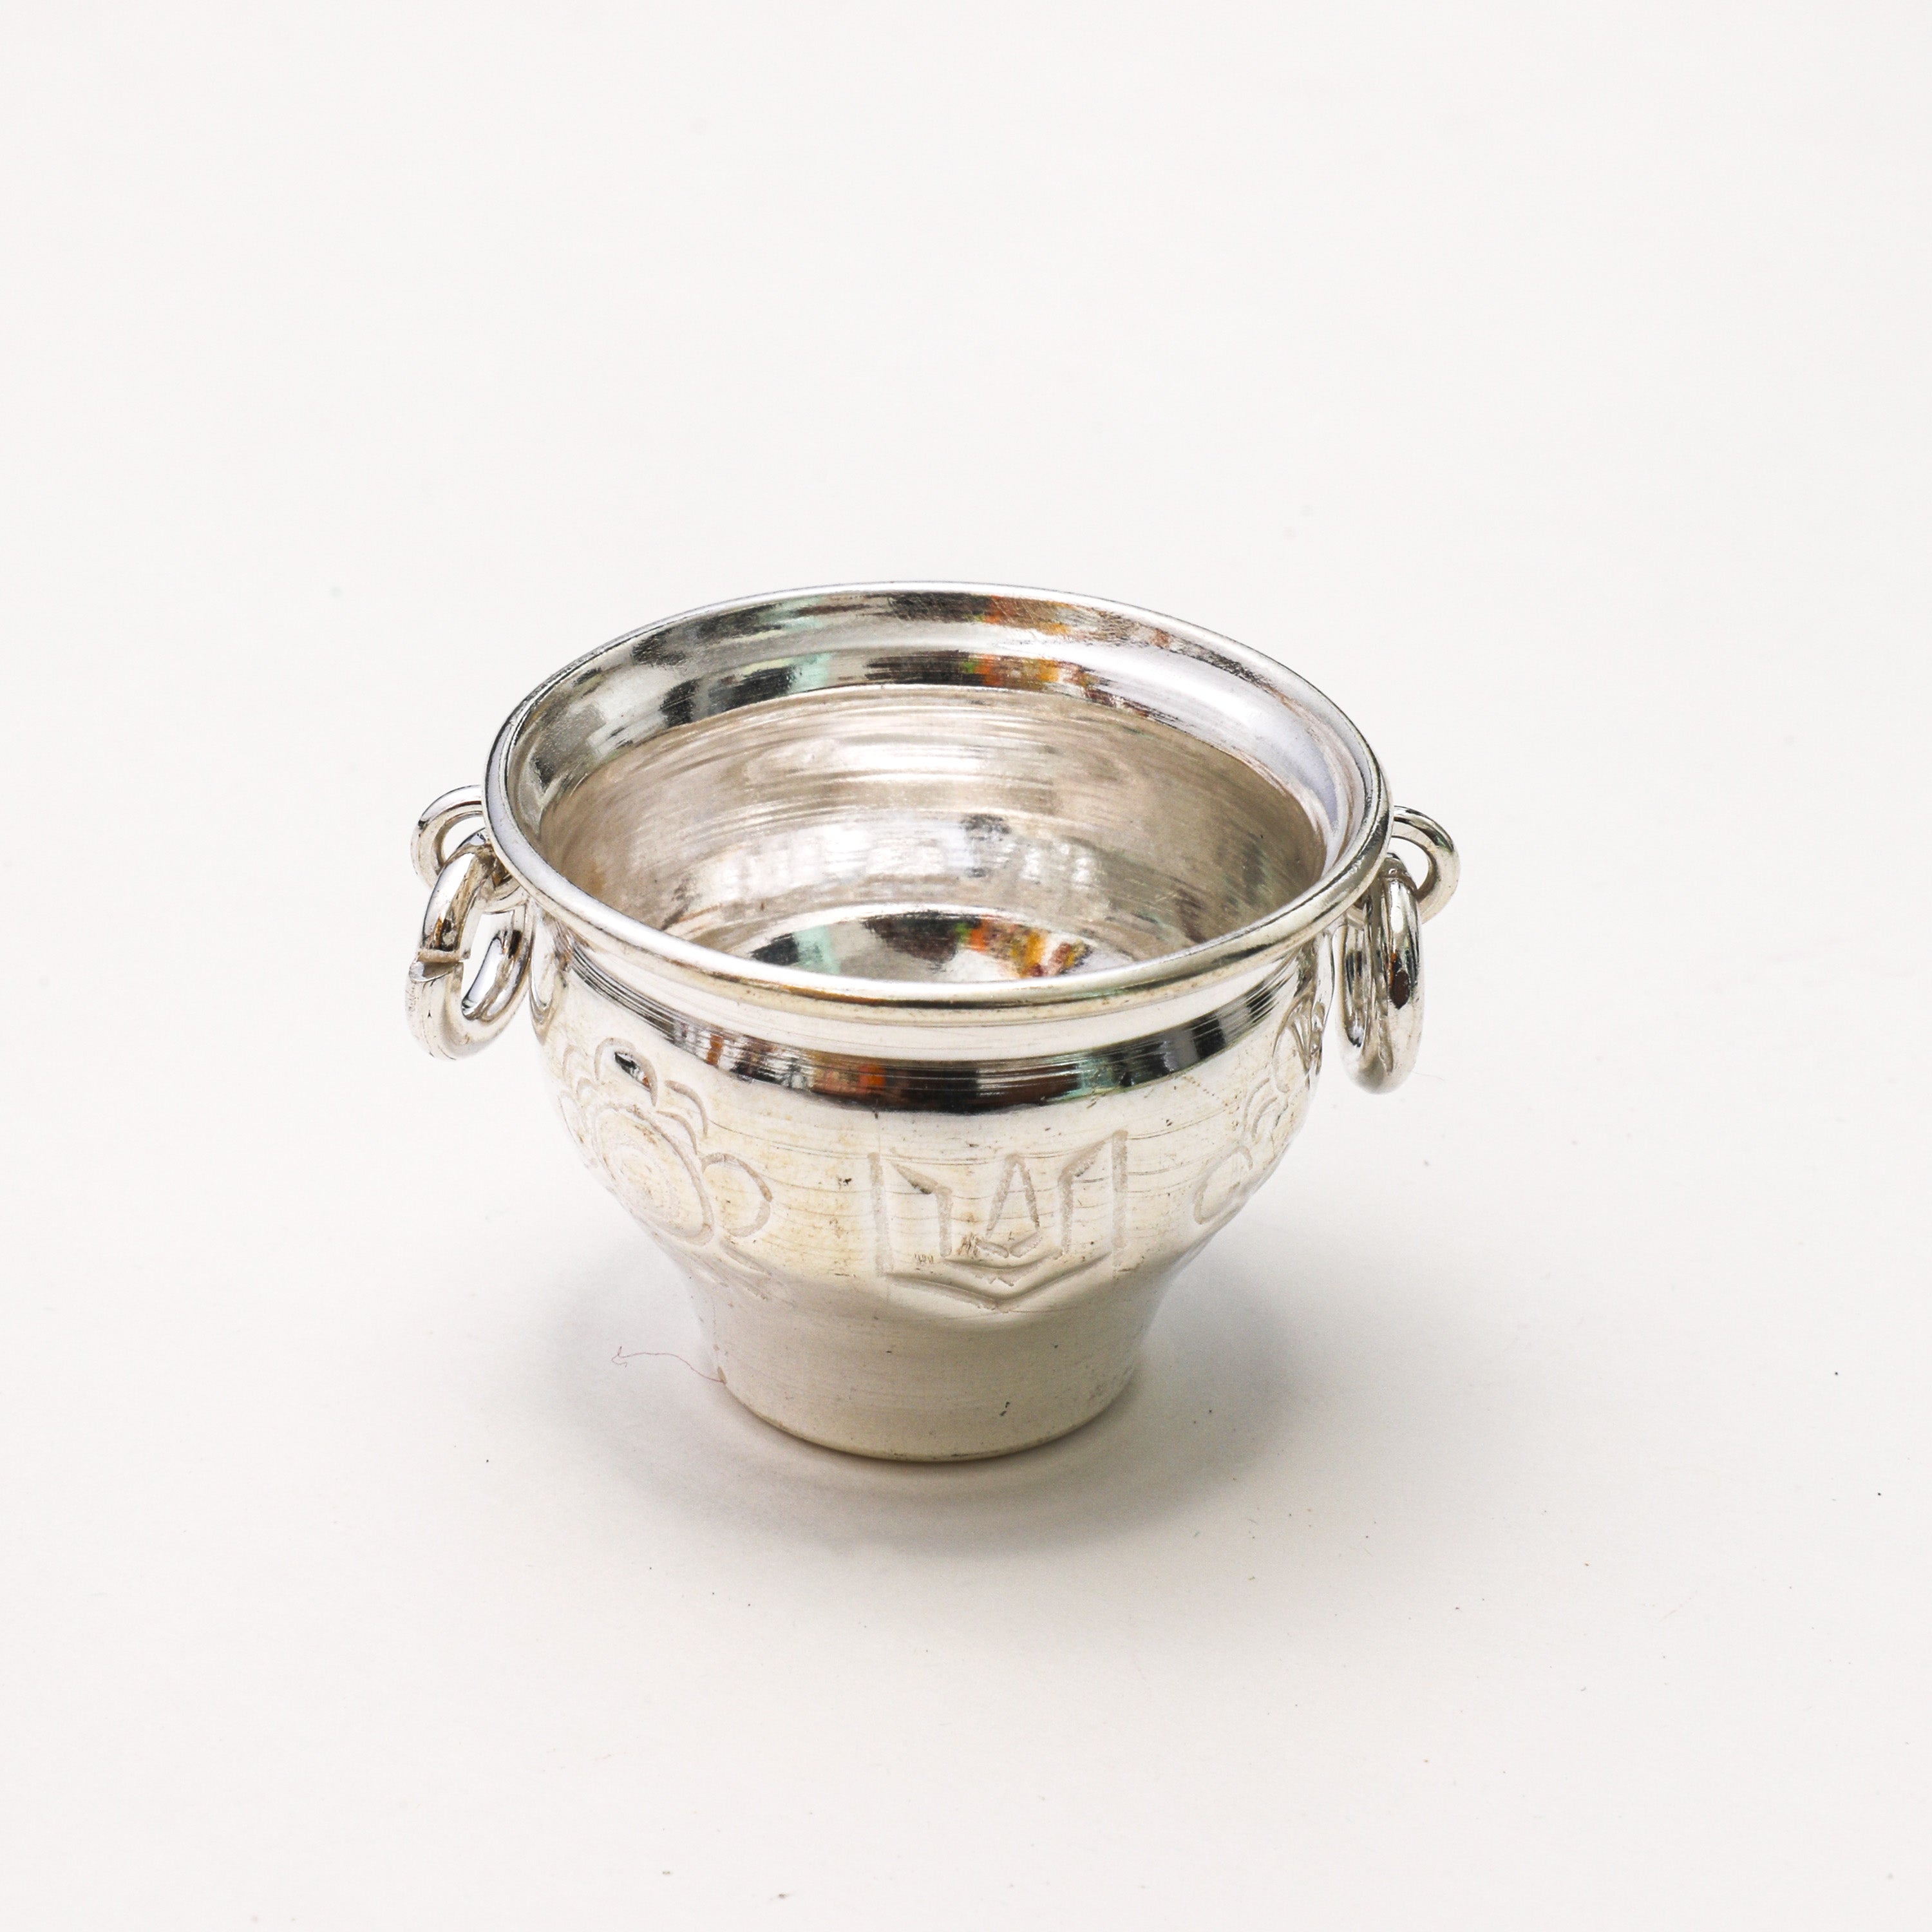 Silver Gangalam Bowl for Pooja rituals